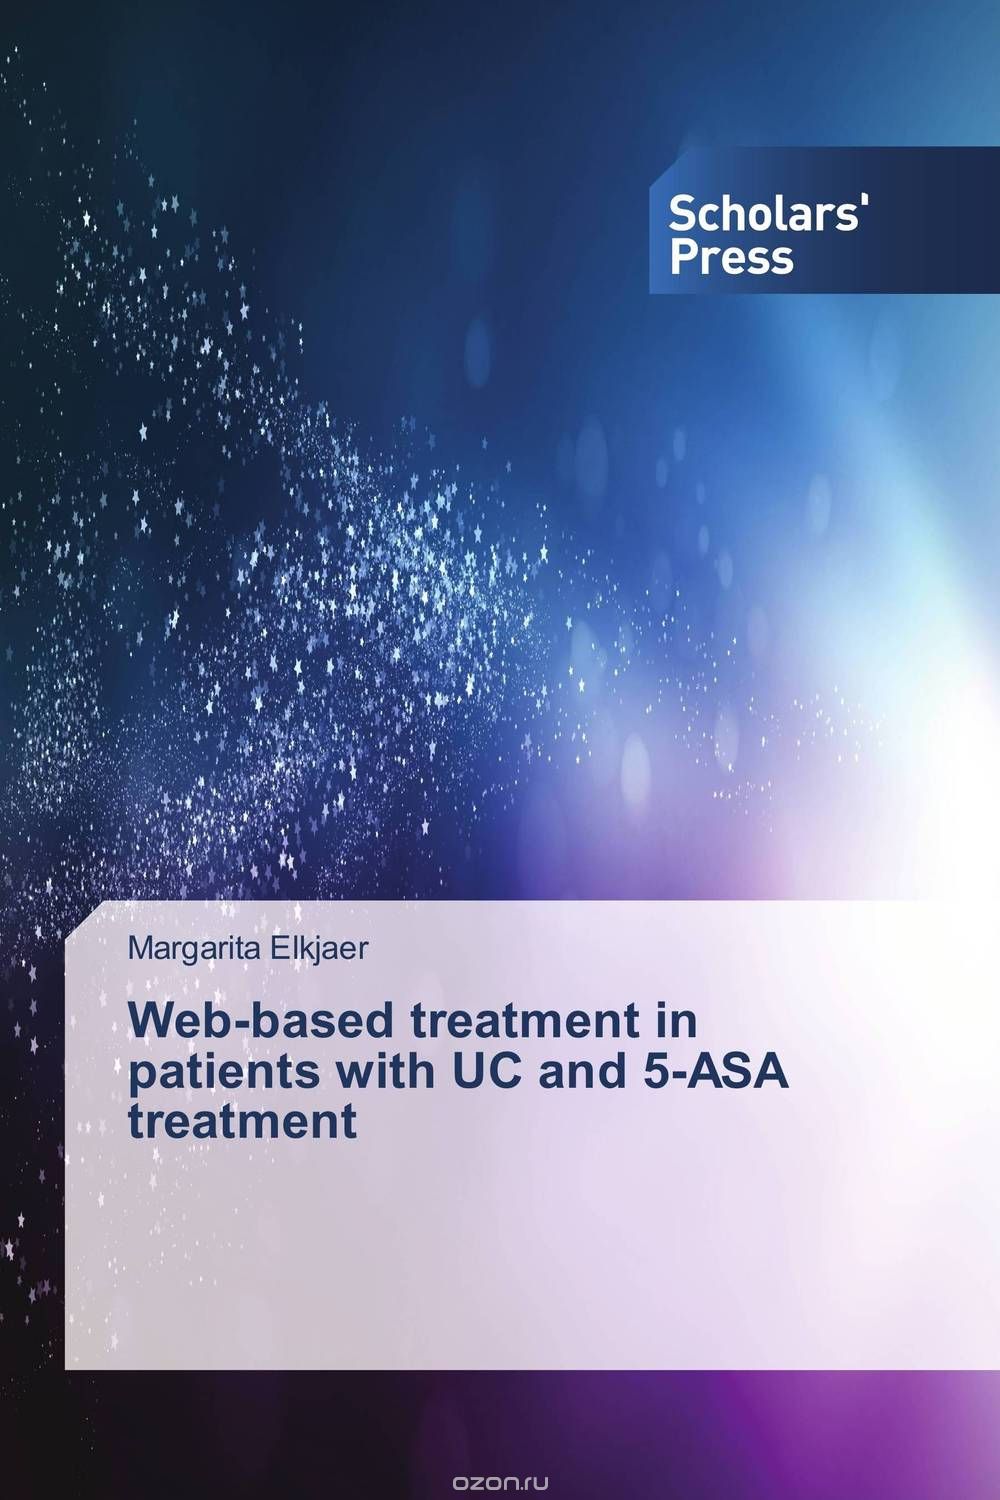 Скачать книгу "Web-based treatment in patients with UC and 5-ASA treatment"